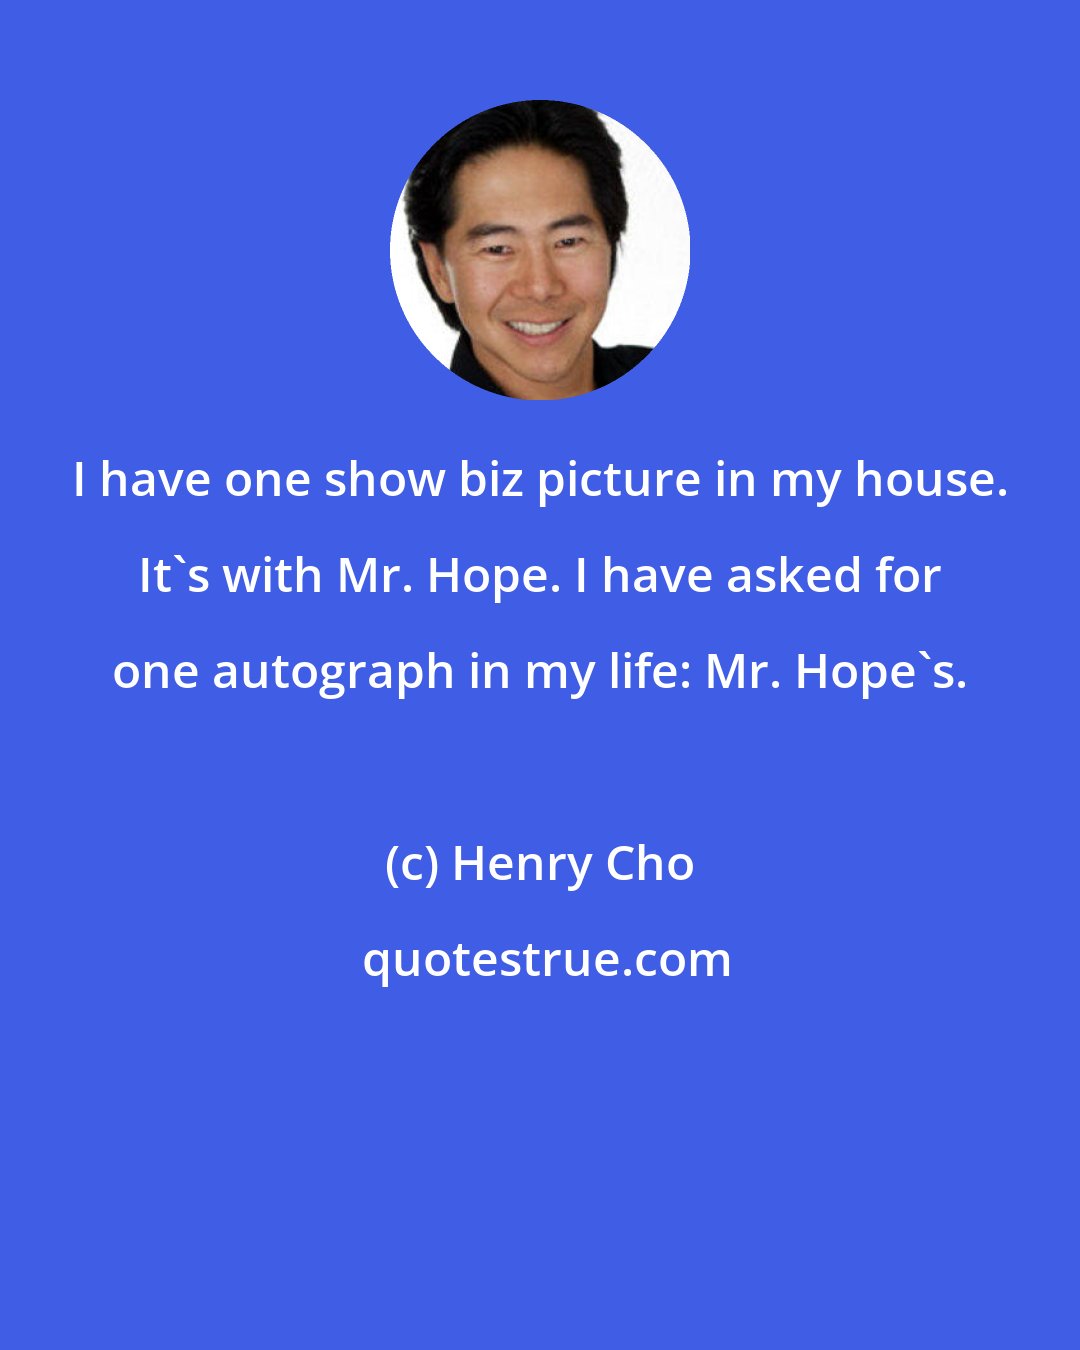 Henry Cho: I have one show biz picture in my house. It's with Mr. Hope. I have asked for one autograph in my life: Mr. Hope's.